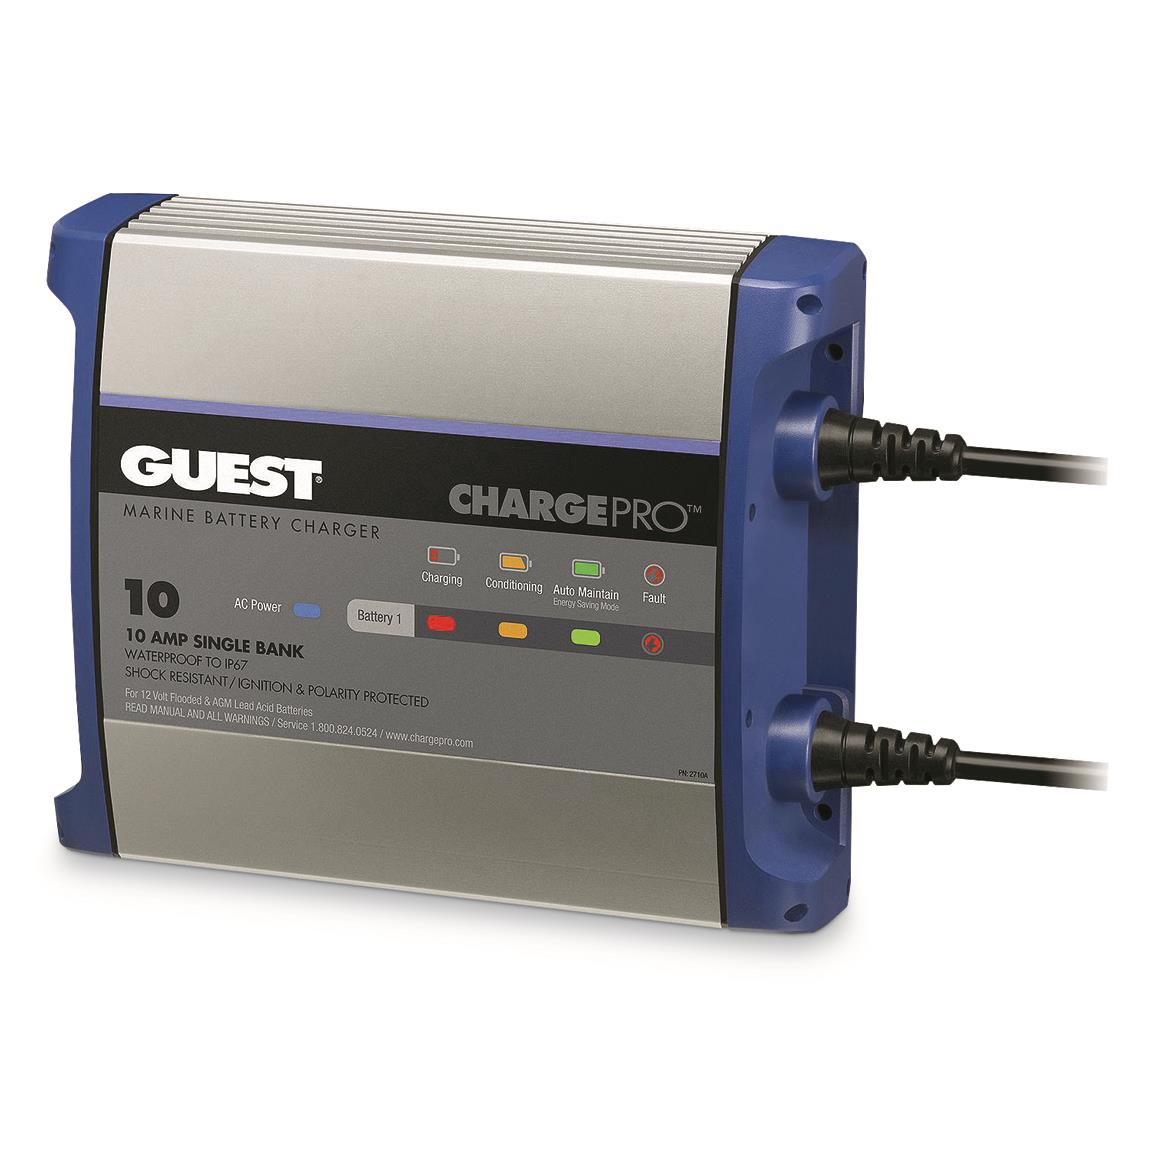 Guest ChargePro On-Board Battery Charger, 10 Amp Single Bank